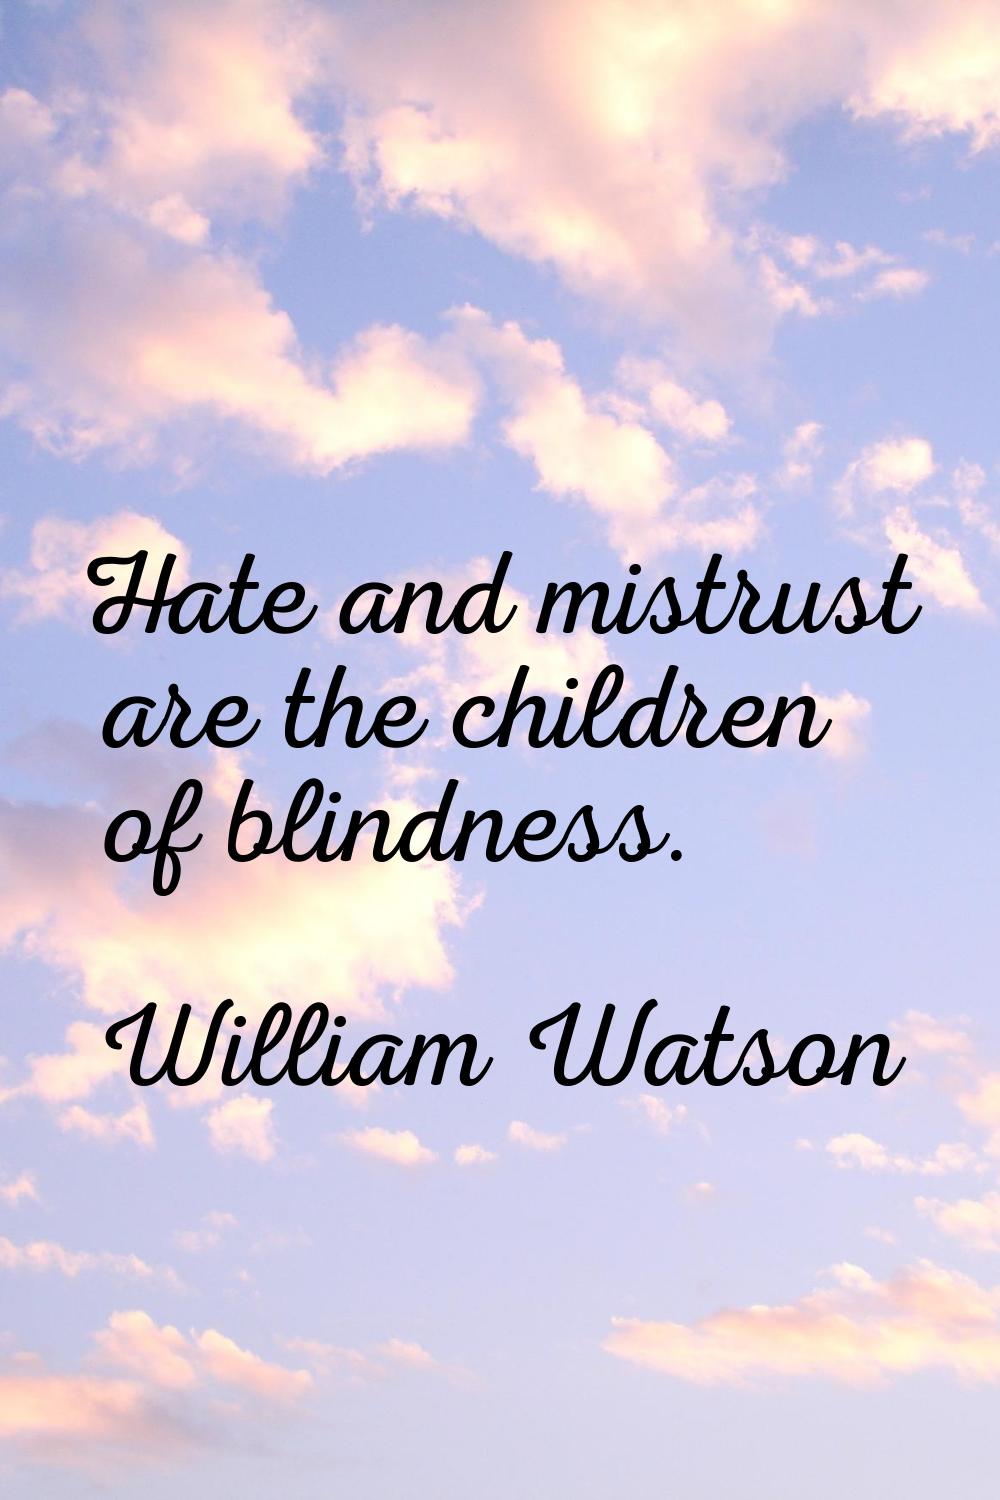 Hate and mistrust are the children of blindness.